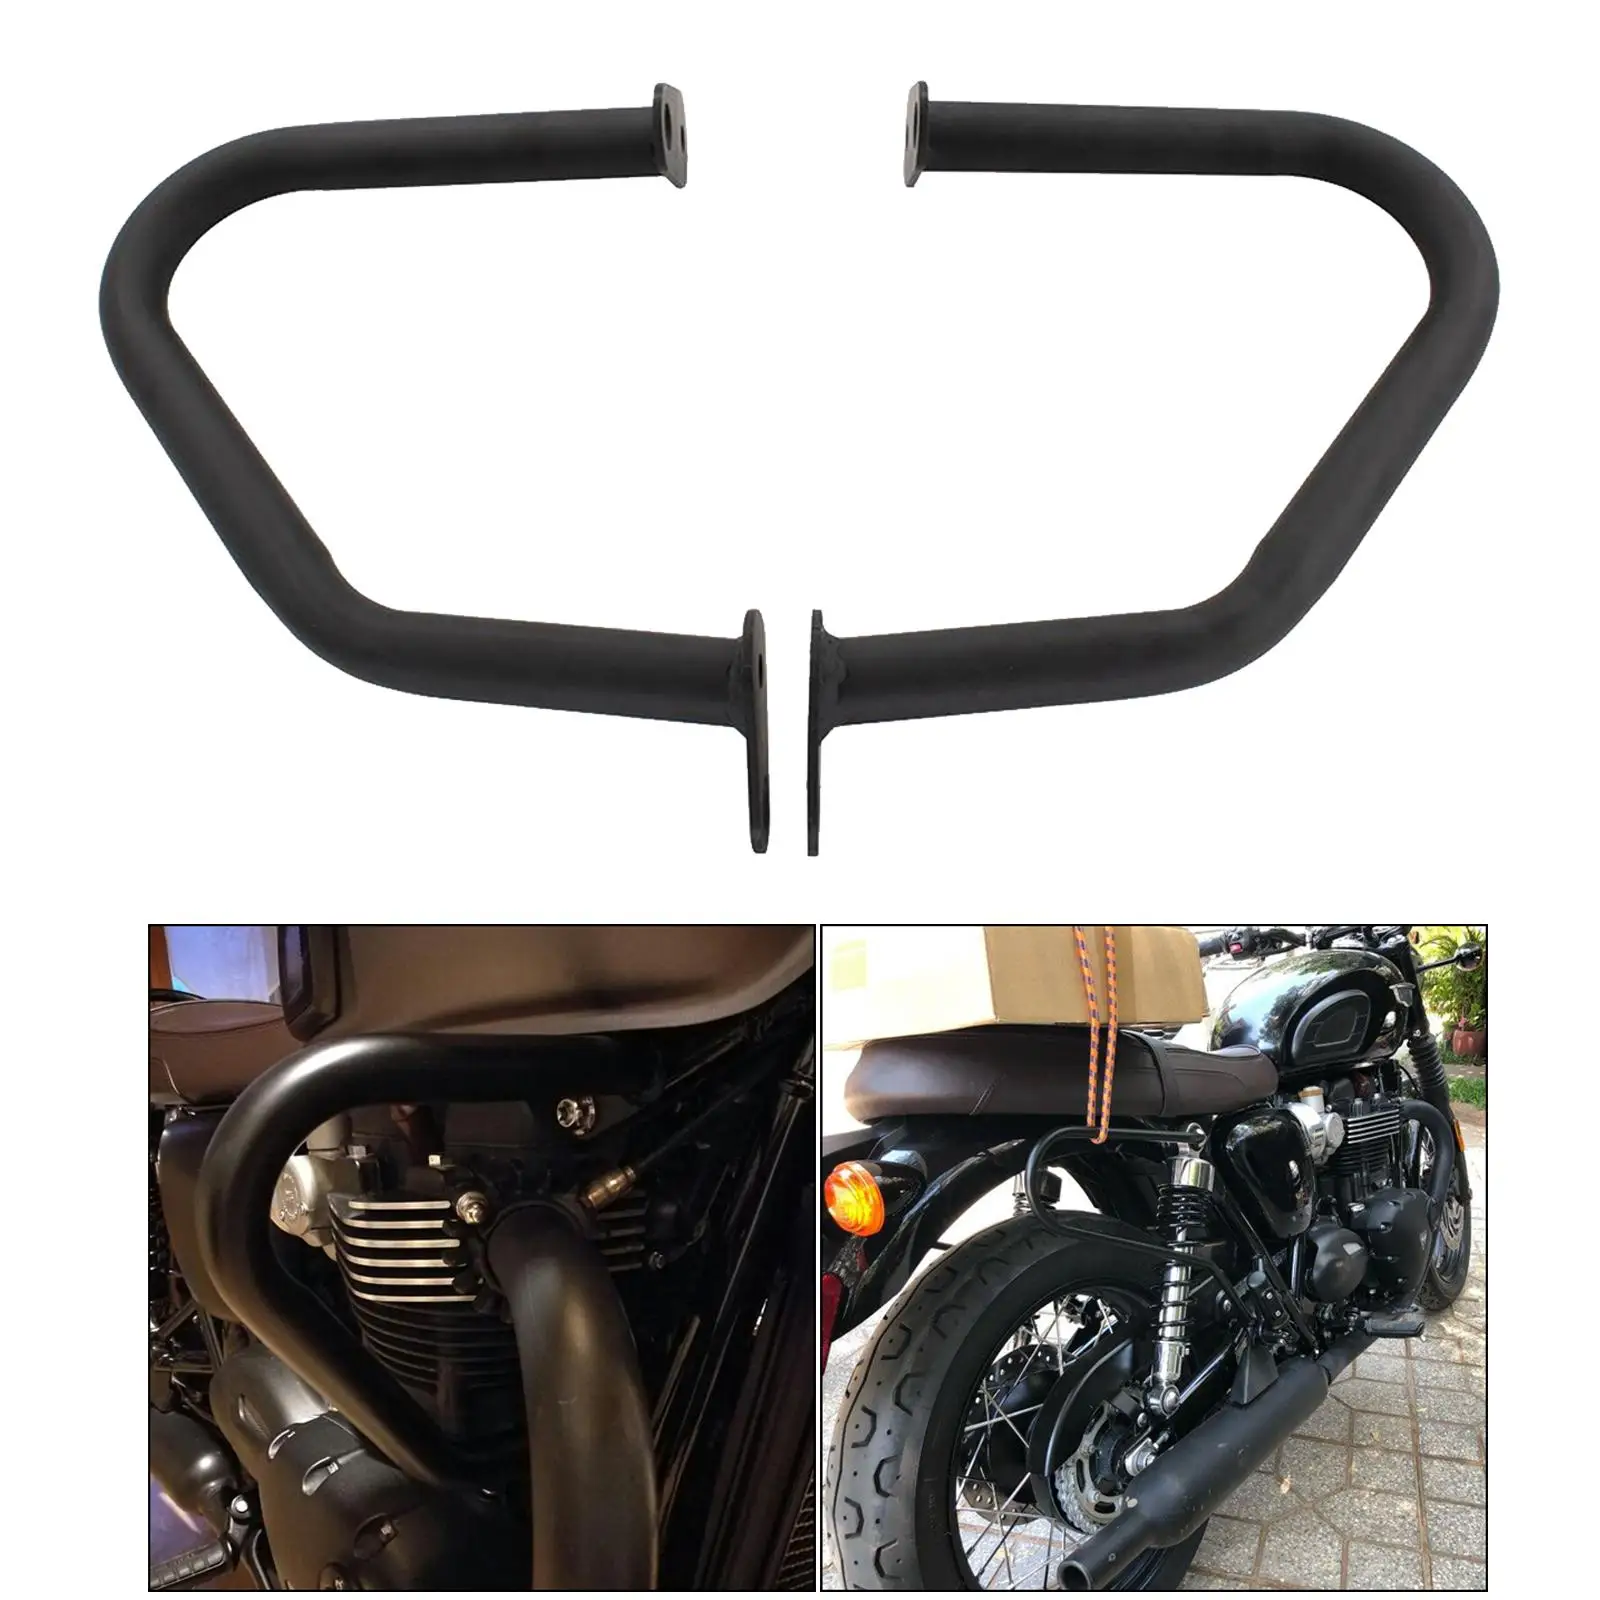 2x Black Motorcycle Engine Guard Protector Crash Bars Replacement for Thruxton 1200 2016-2019